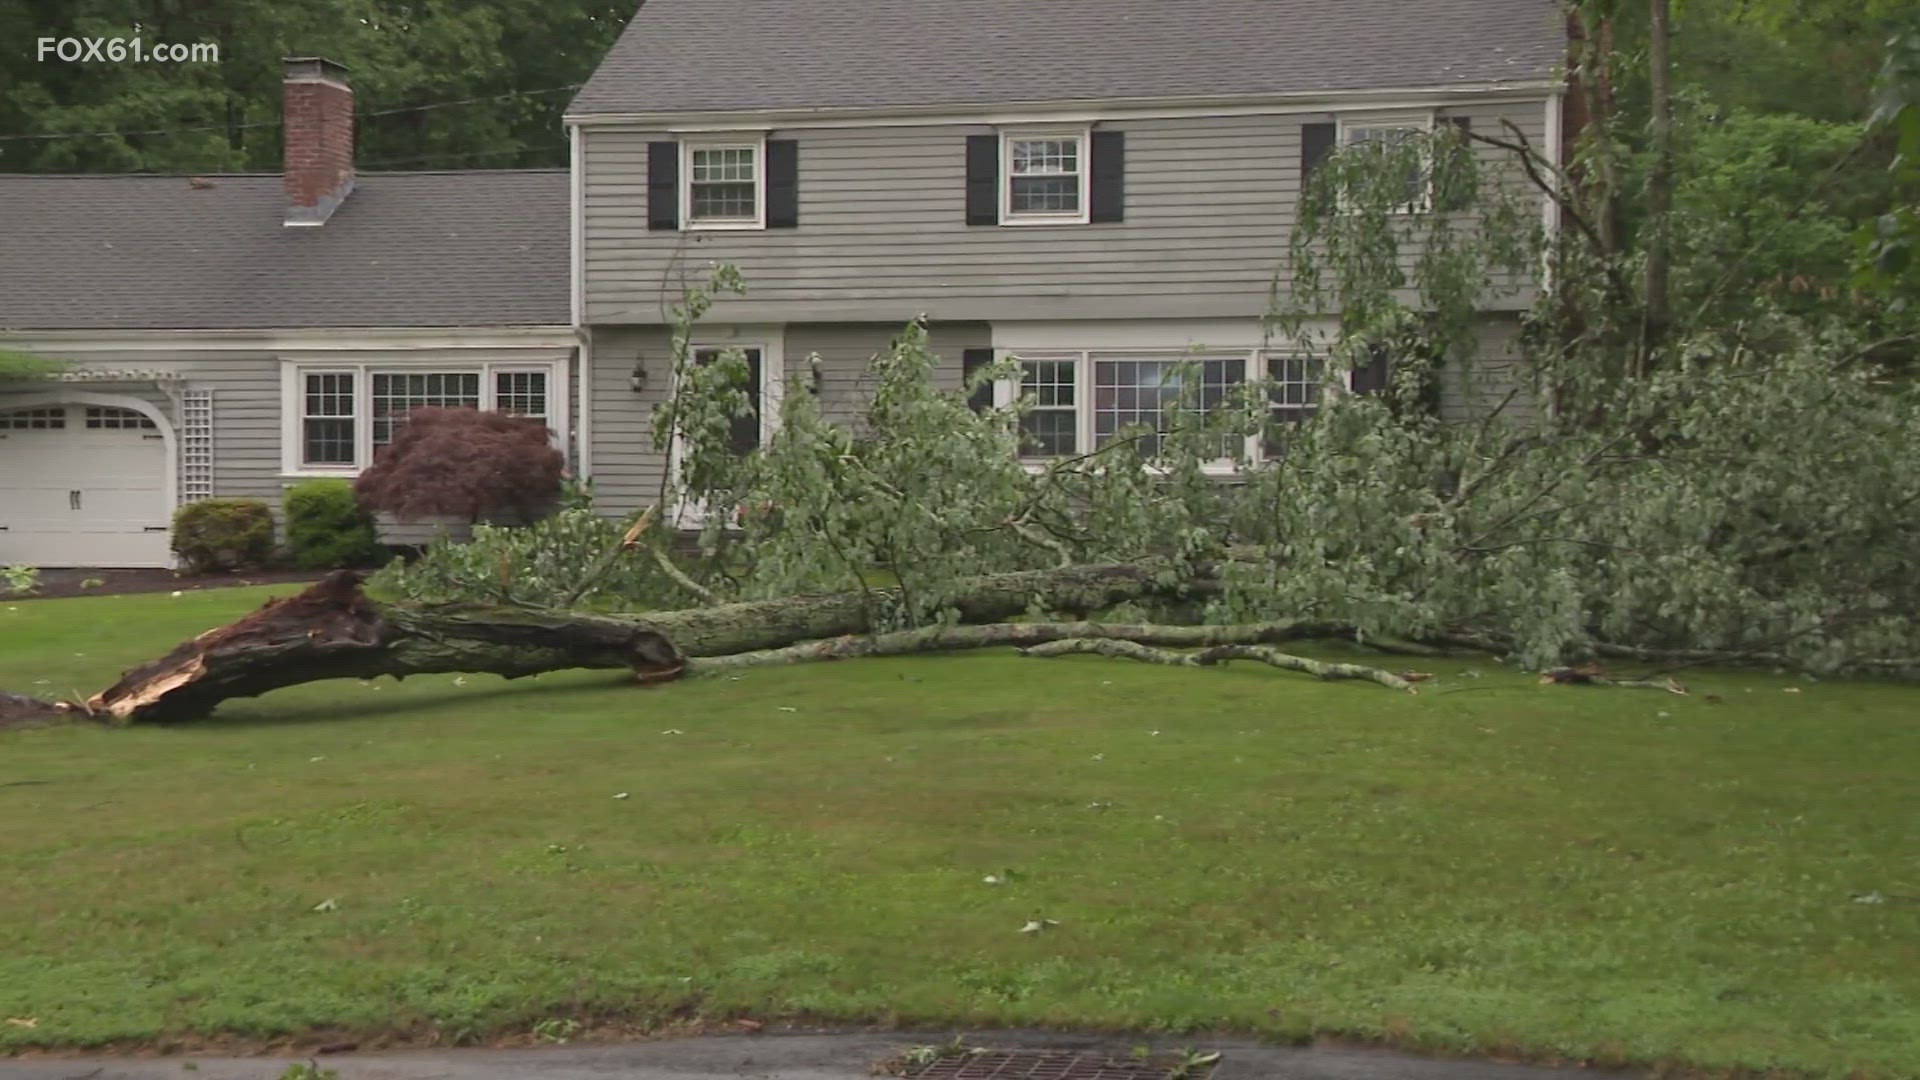 The storm impacted multiple towns across Connecticut Sunday afternoon.